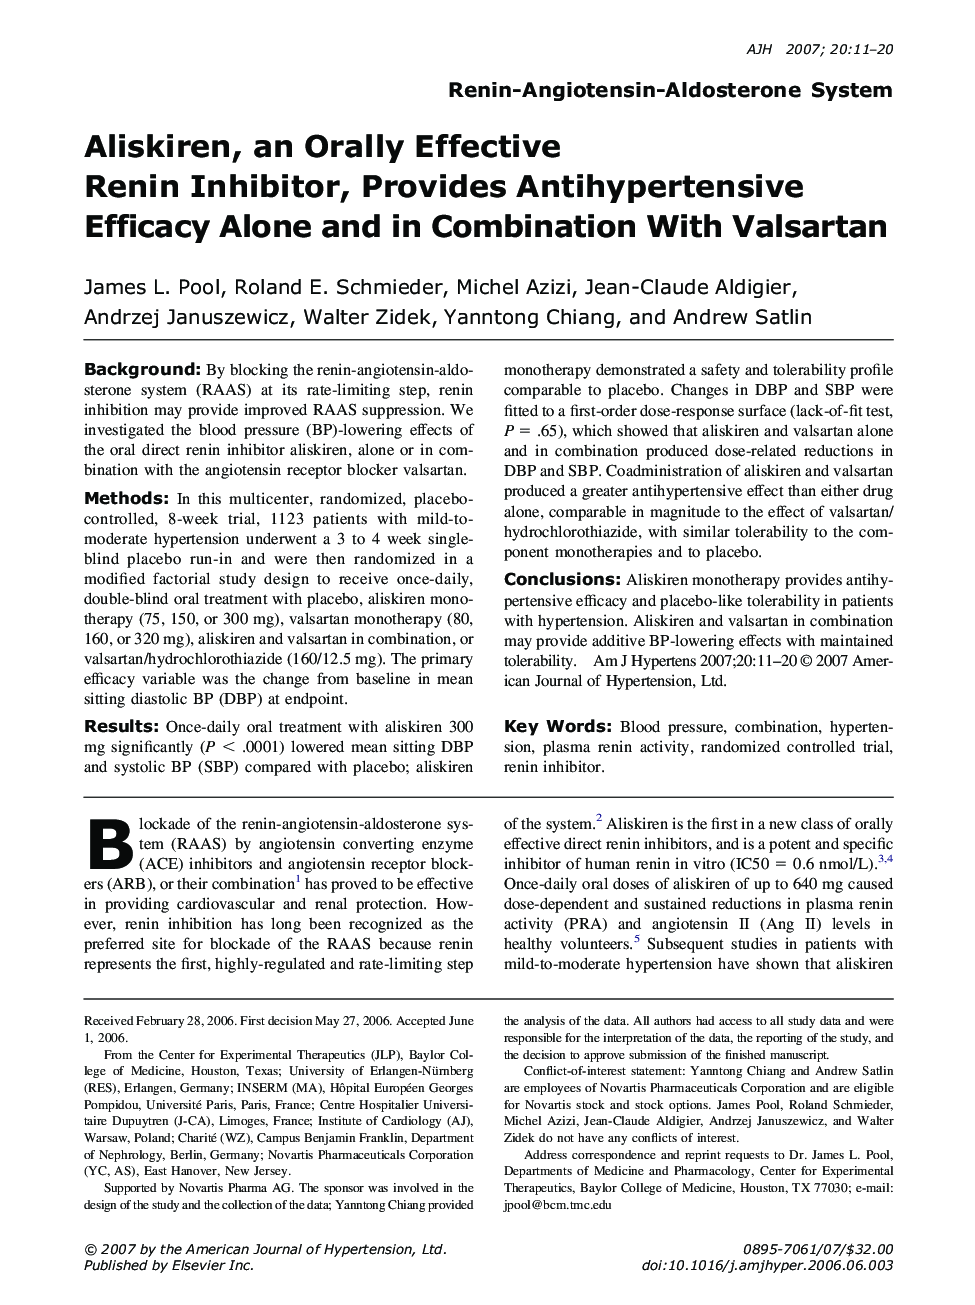 Aliskiren, an Orally Effective Renin Inhibitor, Provides Antihypertensive Efficacy Alone and in Combination With Valsartan